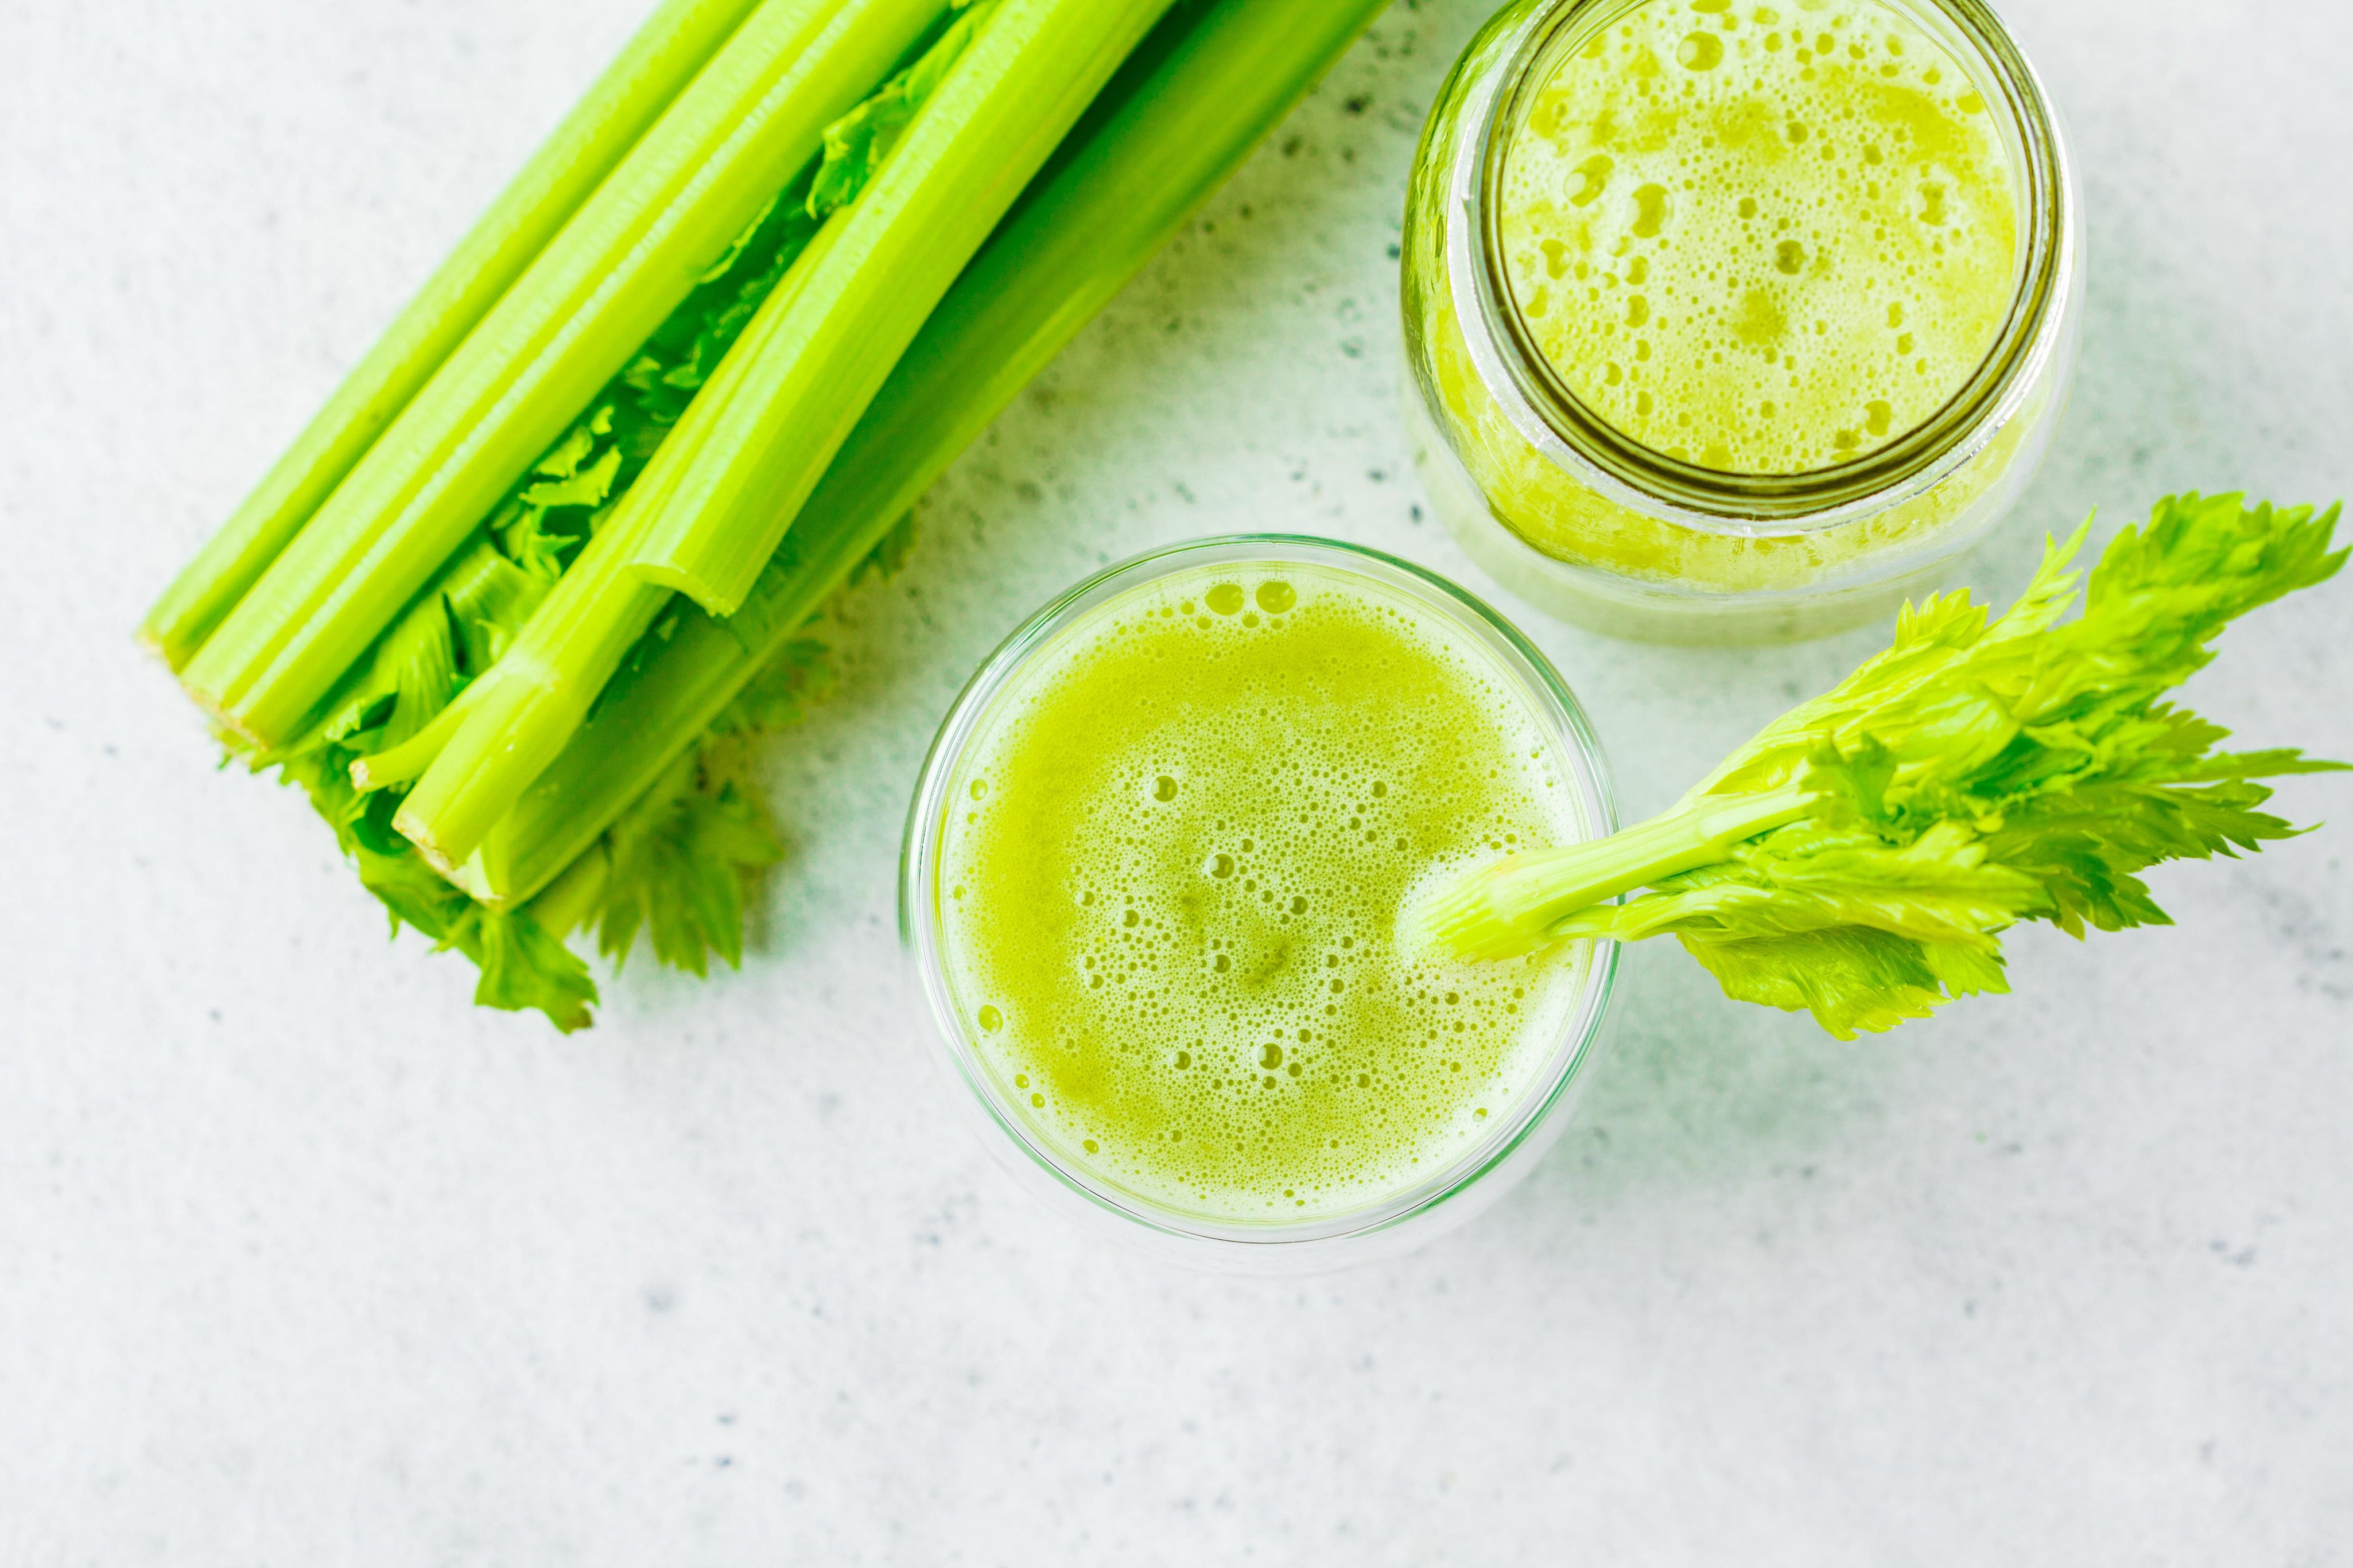 Celery Juice Benefits: What You Should Know